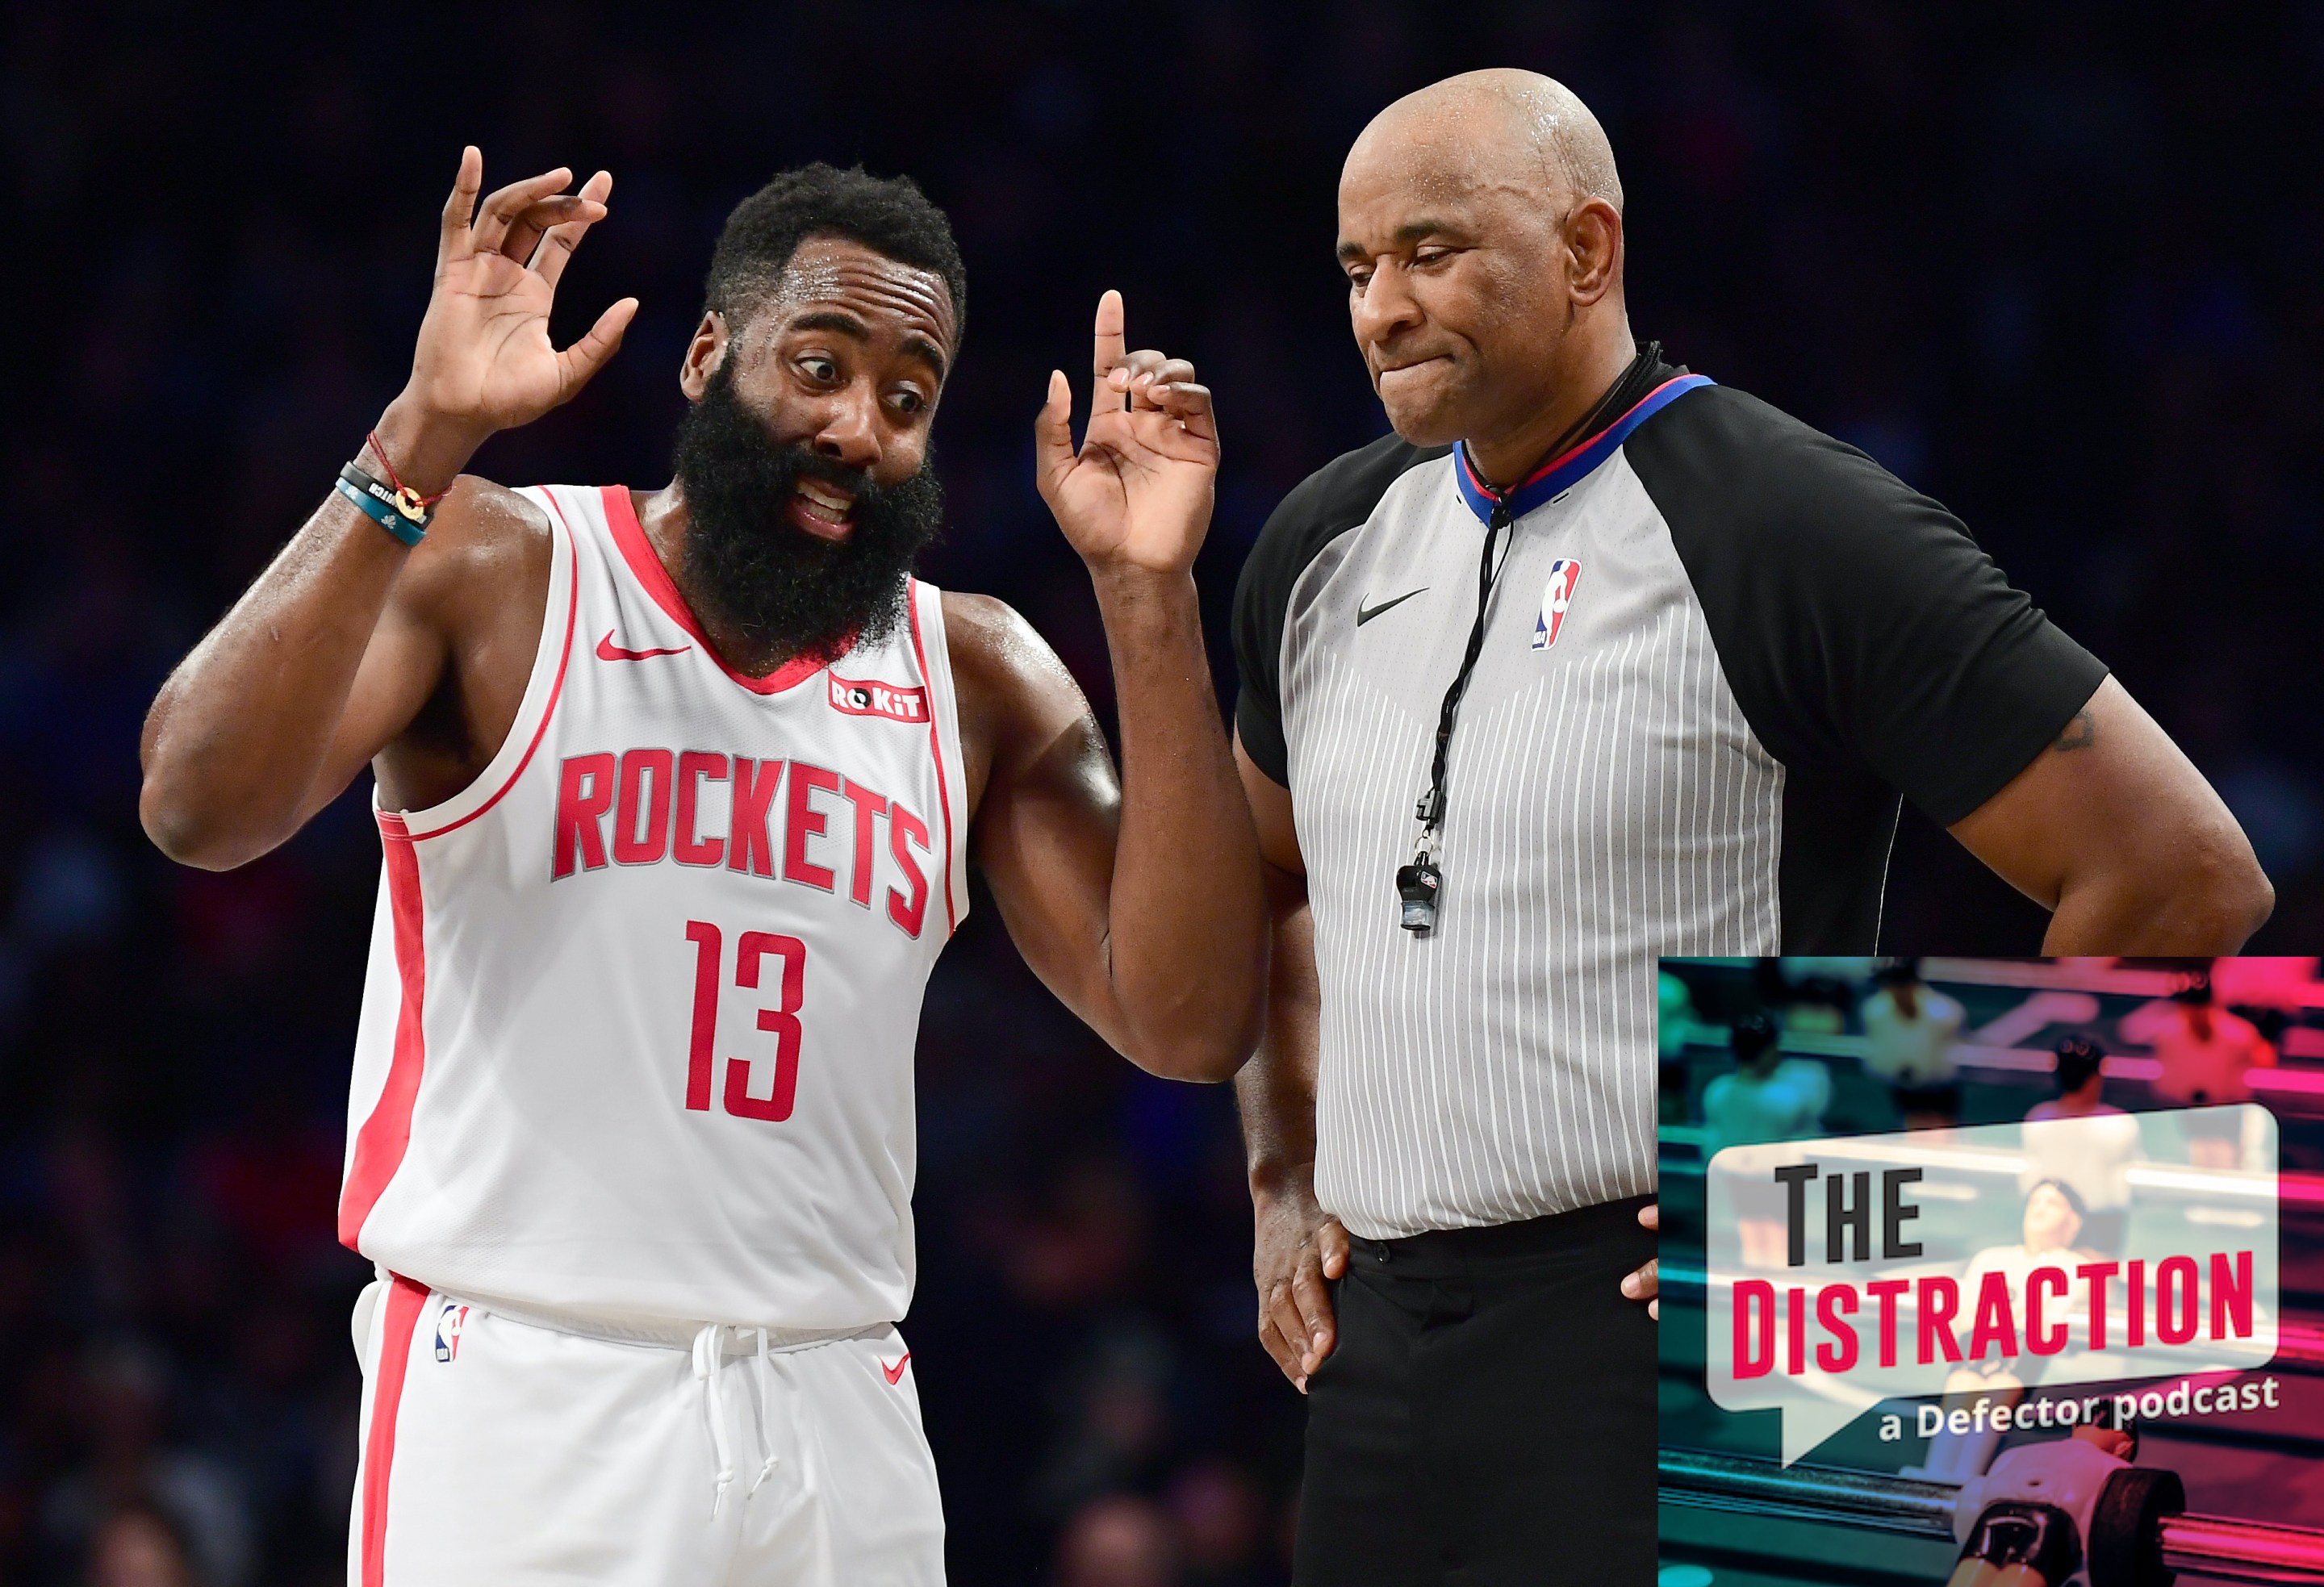 James Harden tells a referee what seems like a very interesting story.